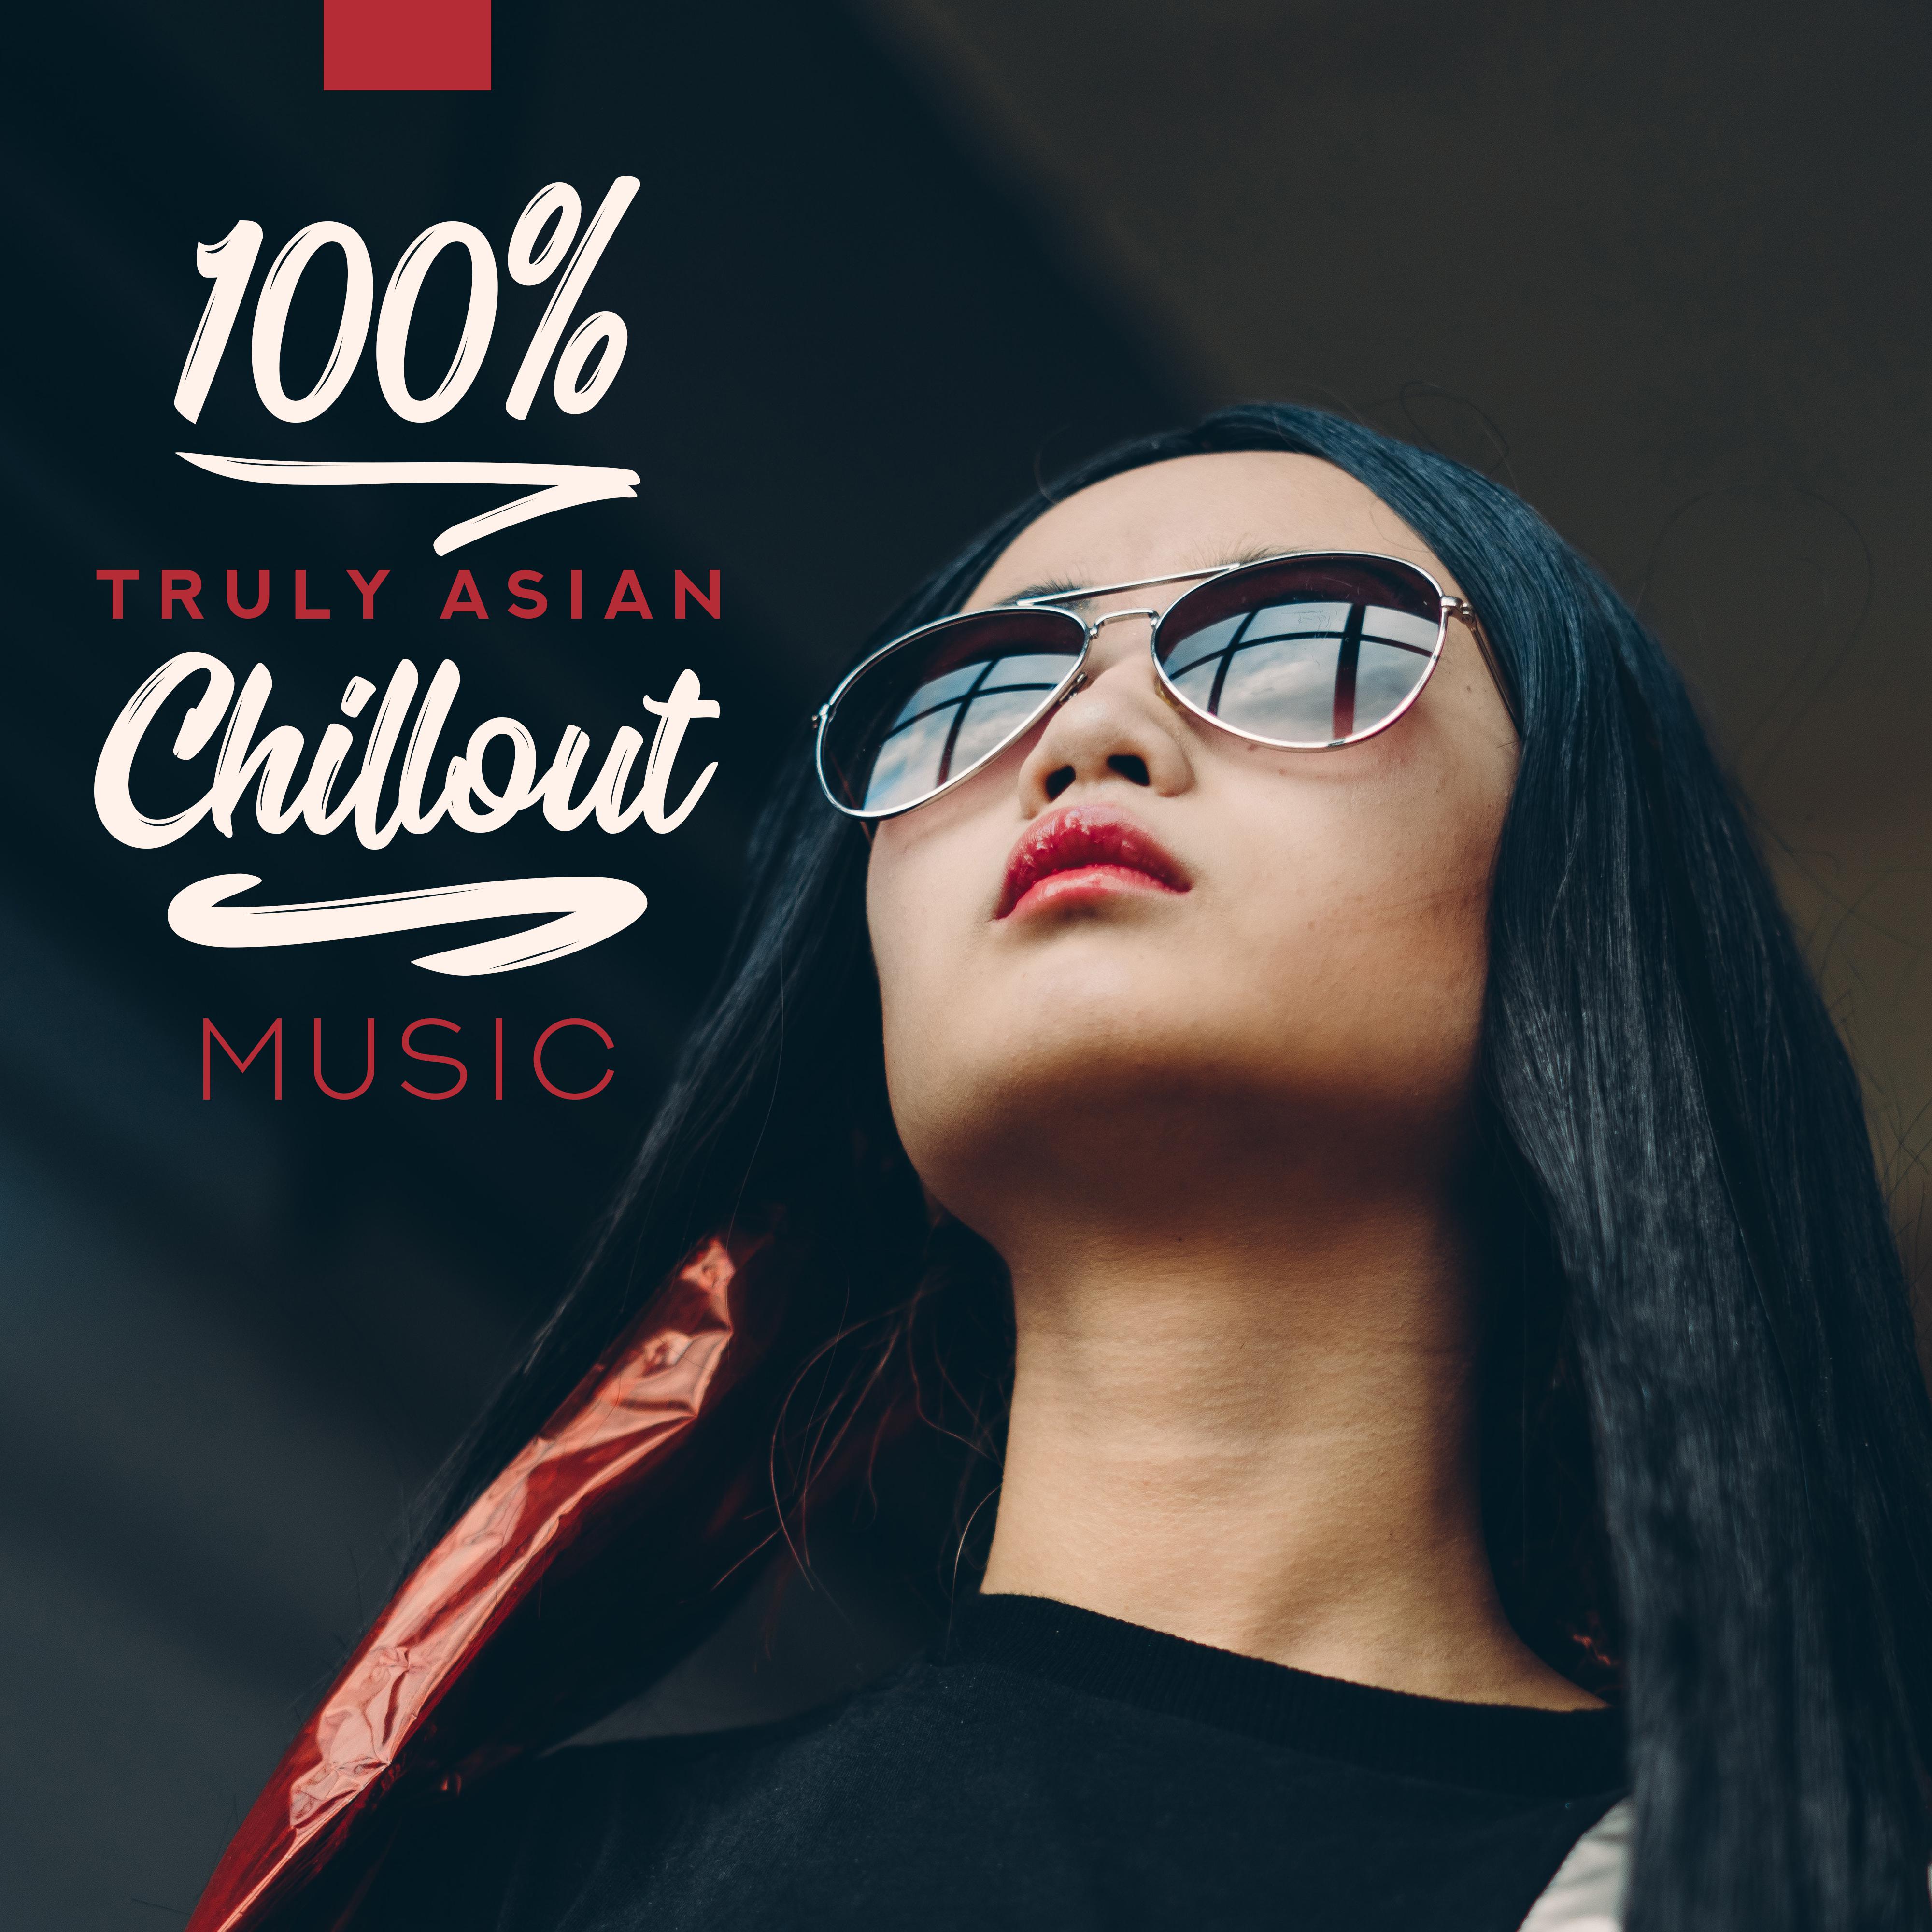 100% Truly Asian Chillout Music